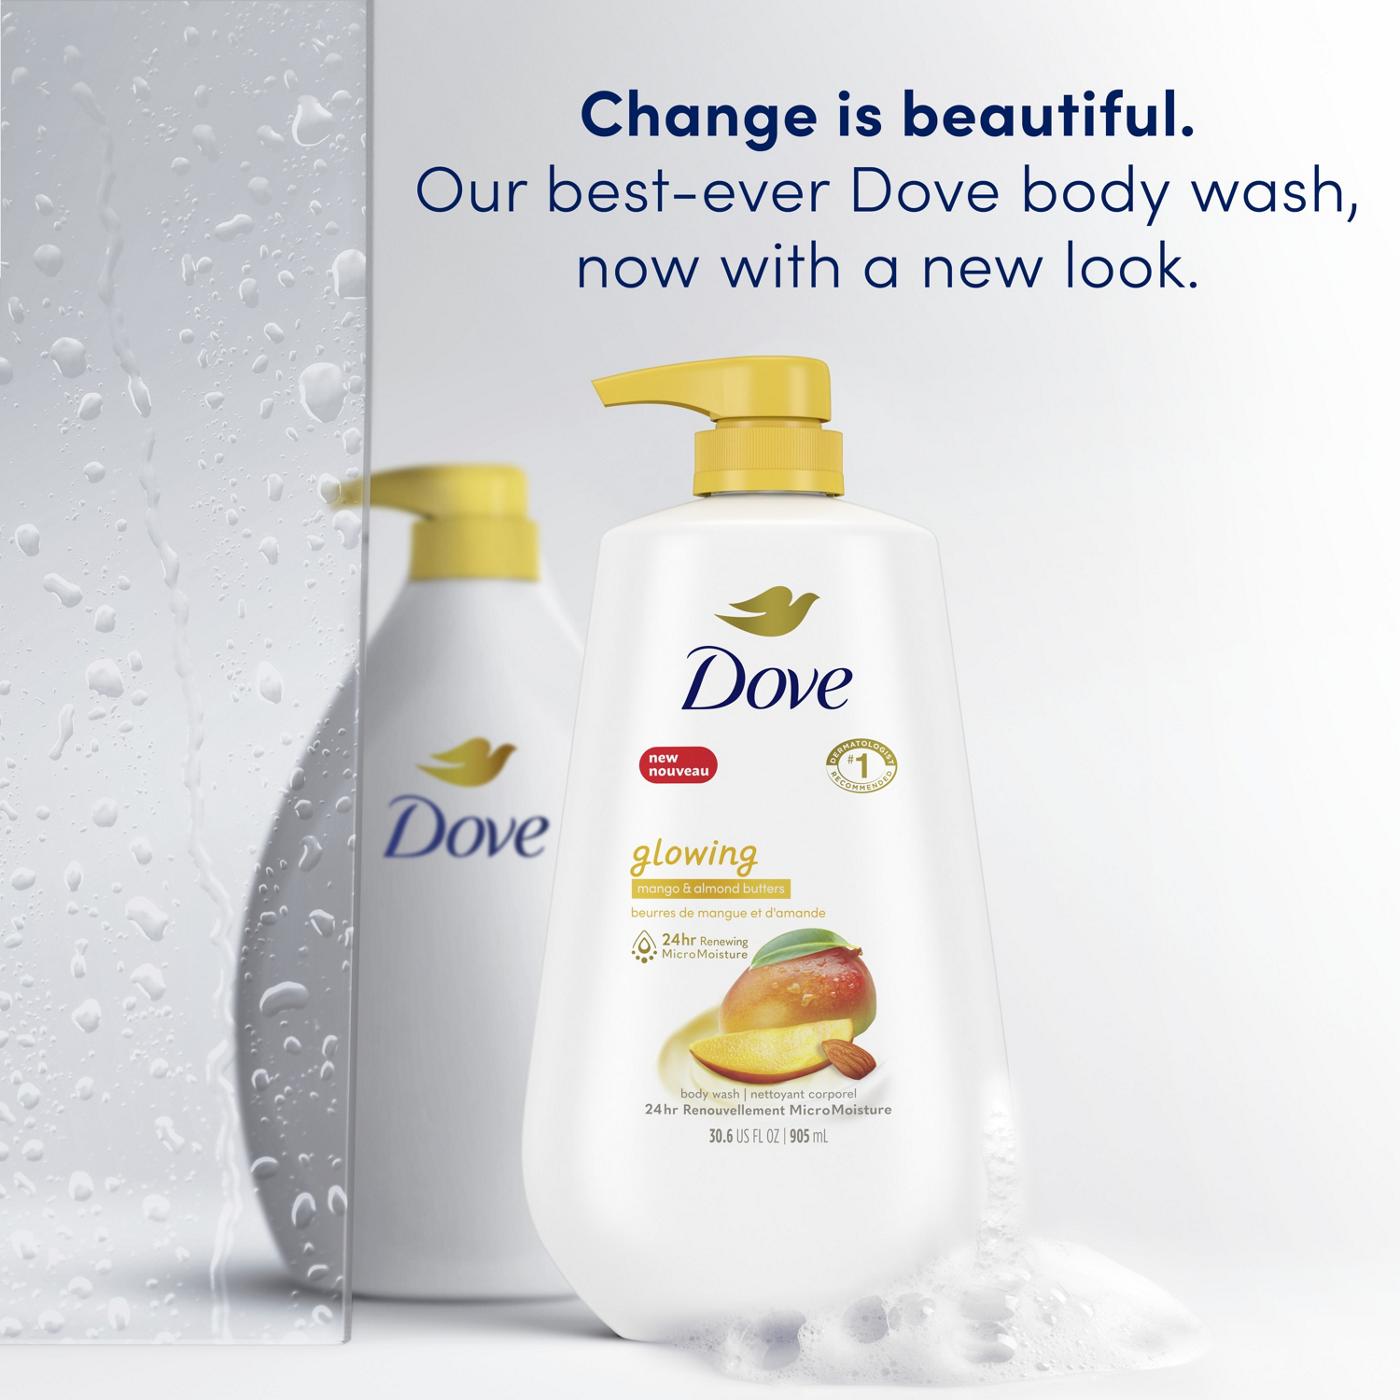 Dove Glowing Body Wash with Pump - Mango & Almond Butters ; image 9 of 9